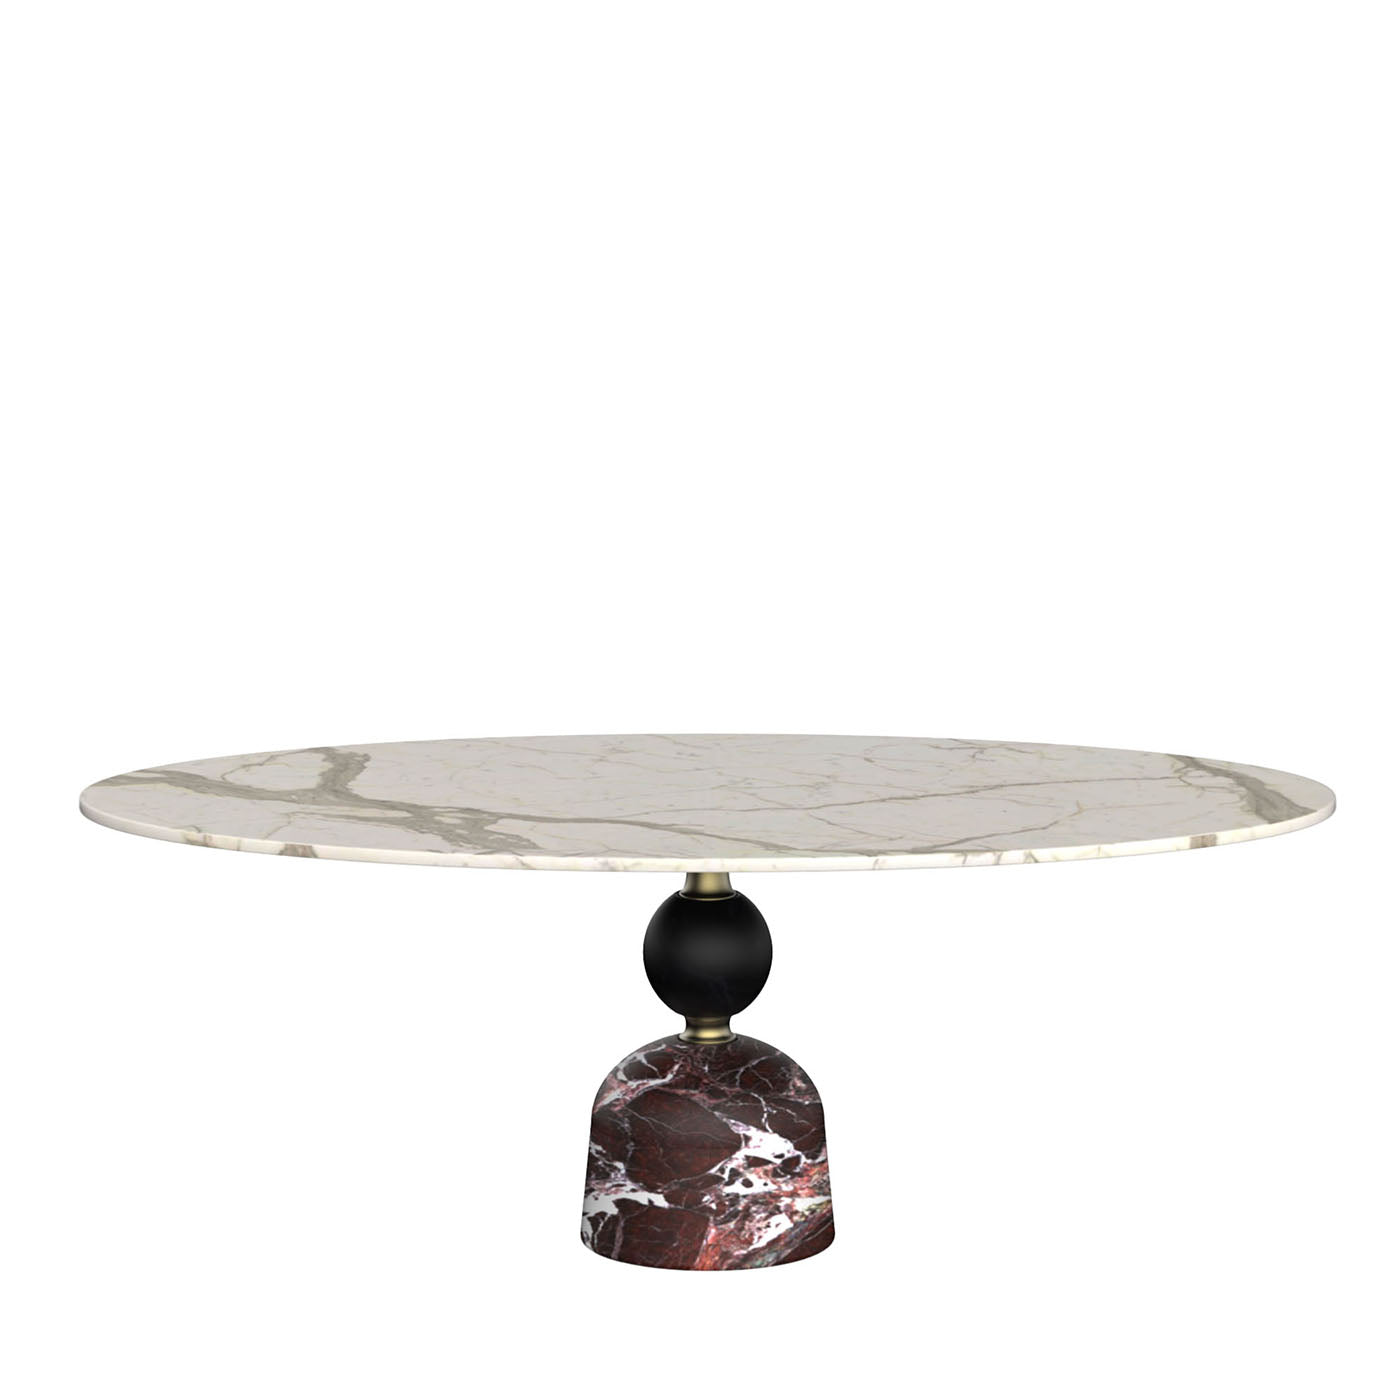 Artù Round Polychrome Marble Dining Table by Paolo Rizzatto #2 - Main view